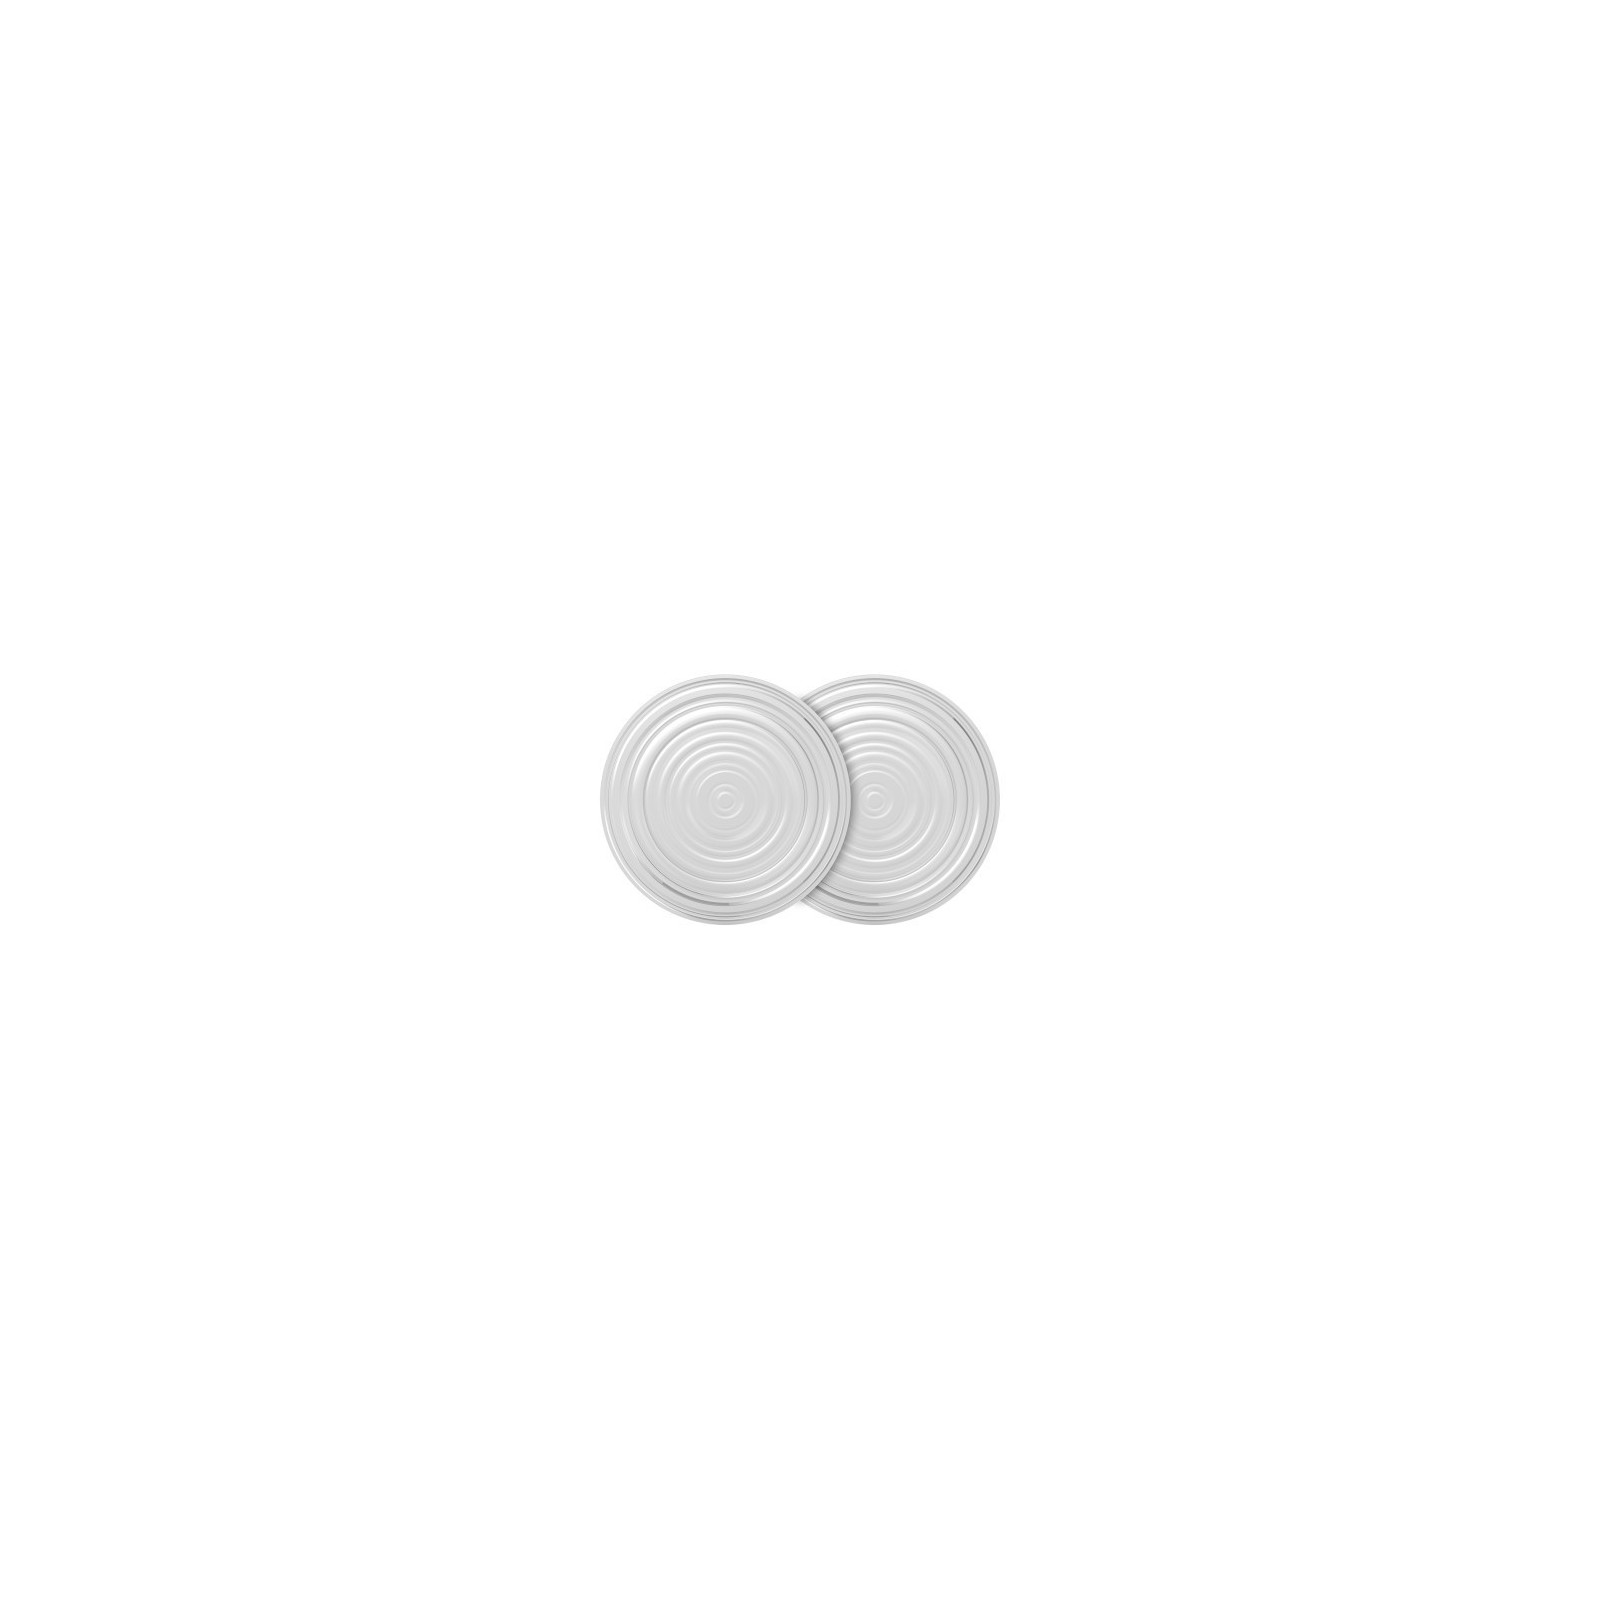 Dr. Brown's Membranes for Electric Breast Pump, 2pk 